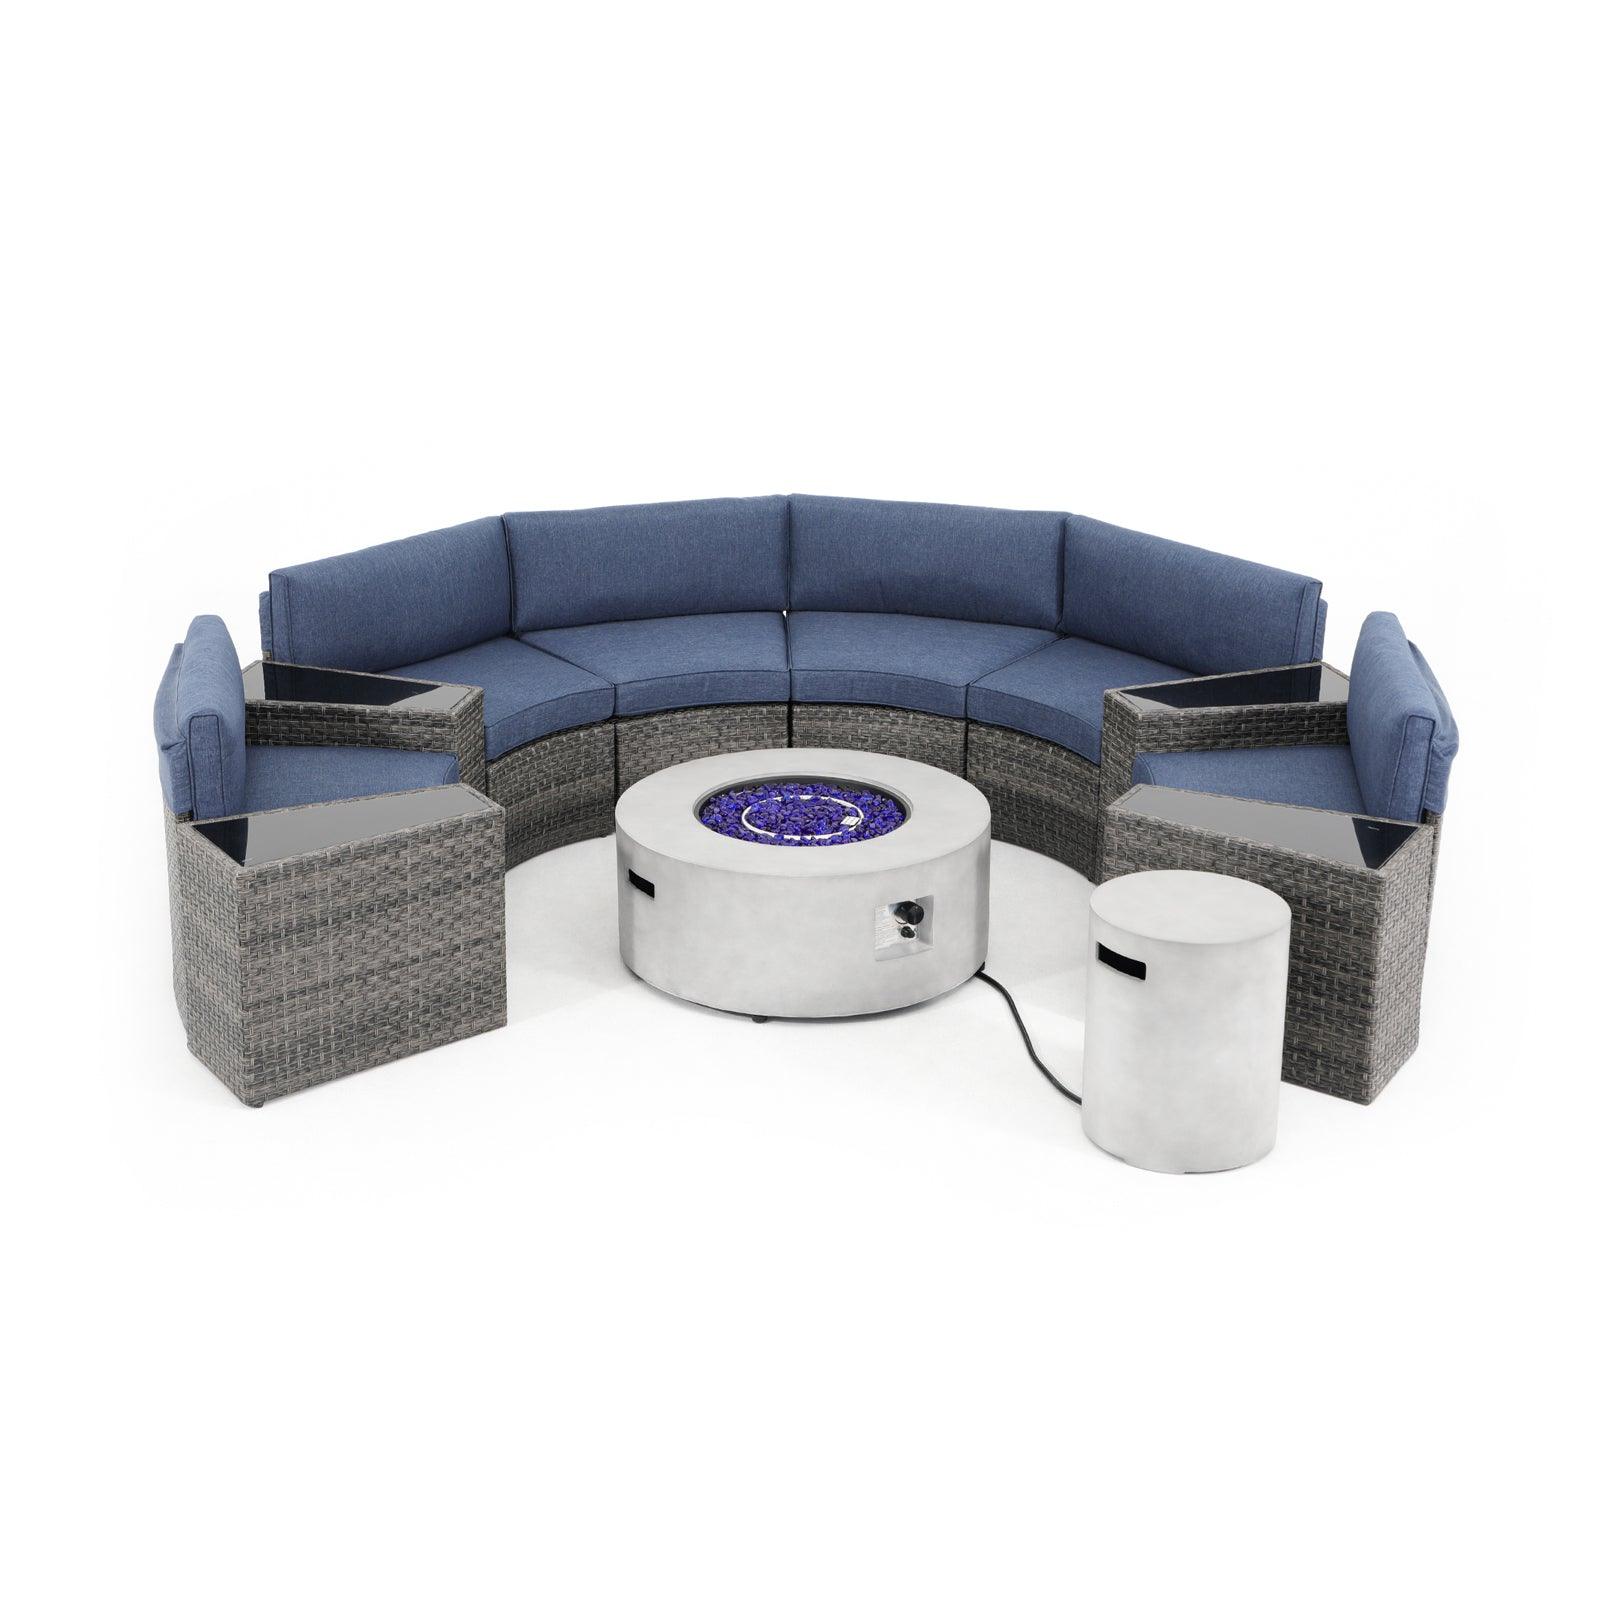 Boboli 6-seater Grey Wicker Curved Sectional sofas with navy blue cushions + 4 side tables + 1 grey Propane Fire Pit with tank holder, front view- Jardina Furniture#color_Navy Blue #piece_11-pc.